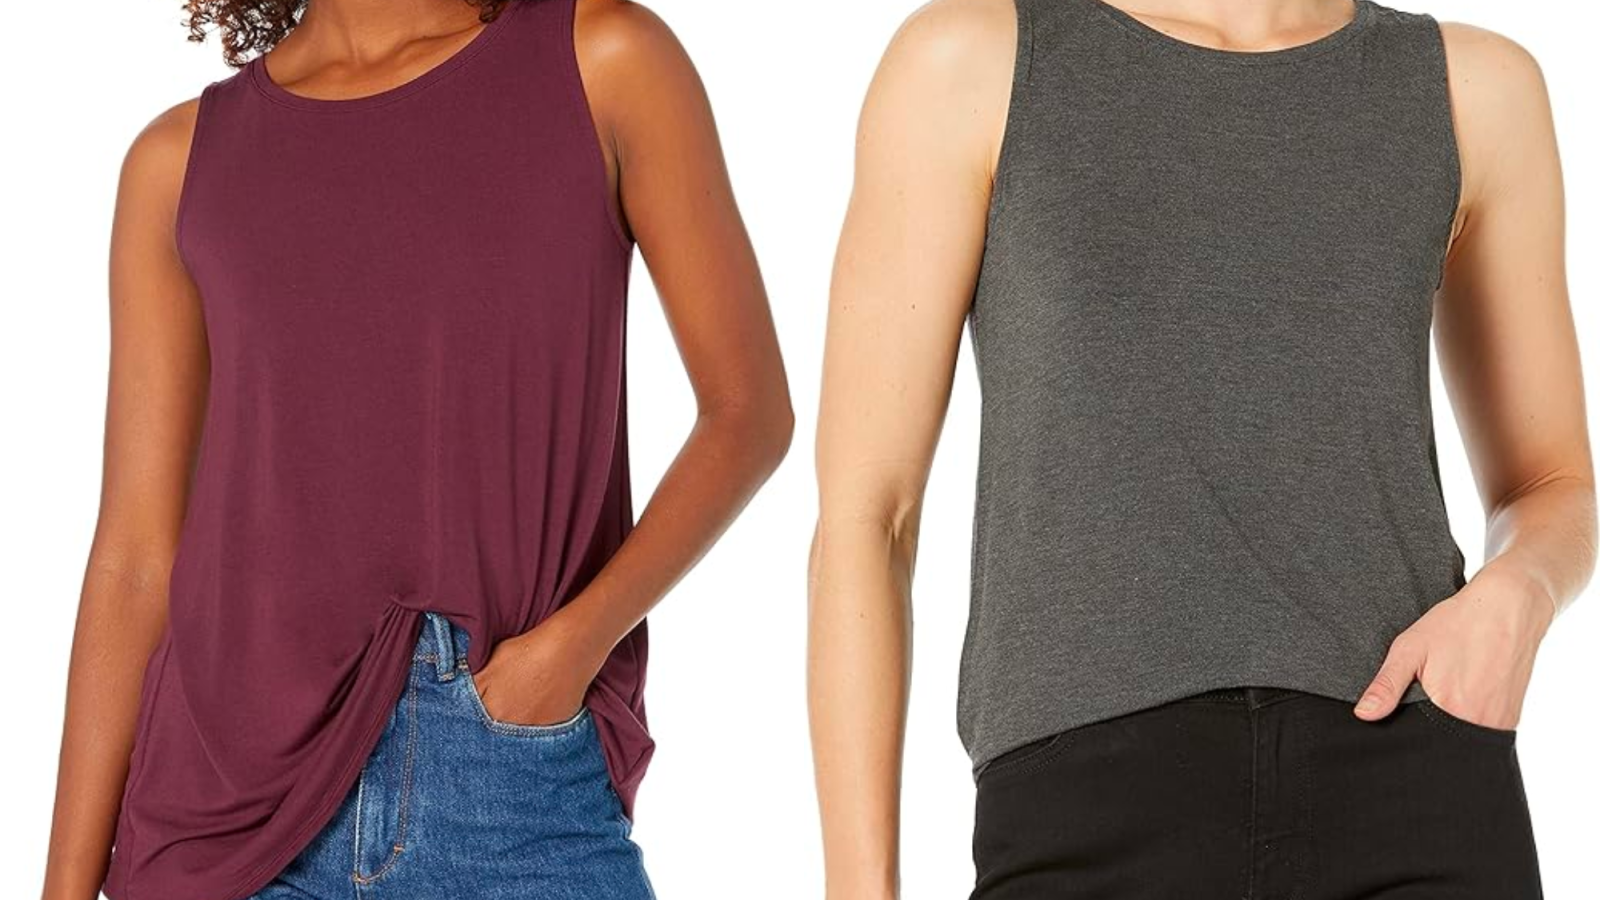 Upgrade Your Old Tank Top With This New, Flowy Find